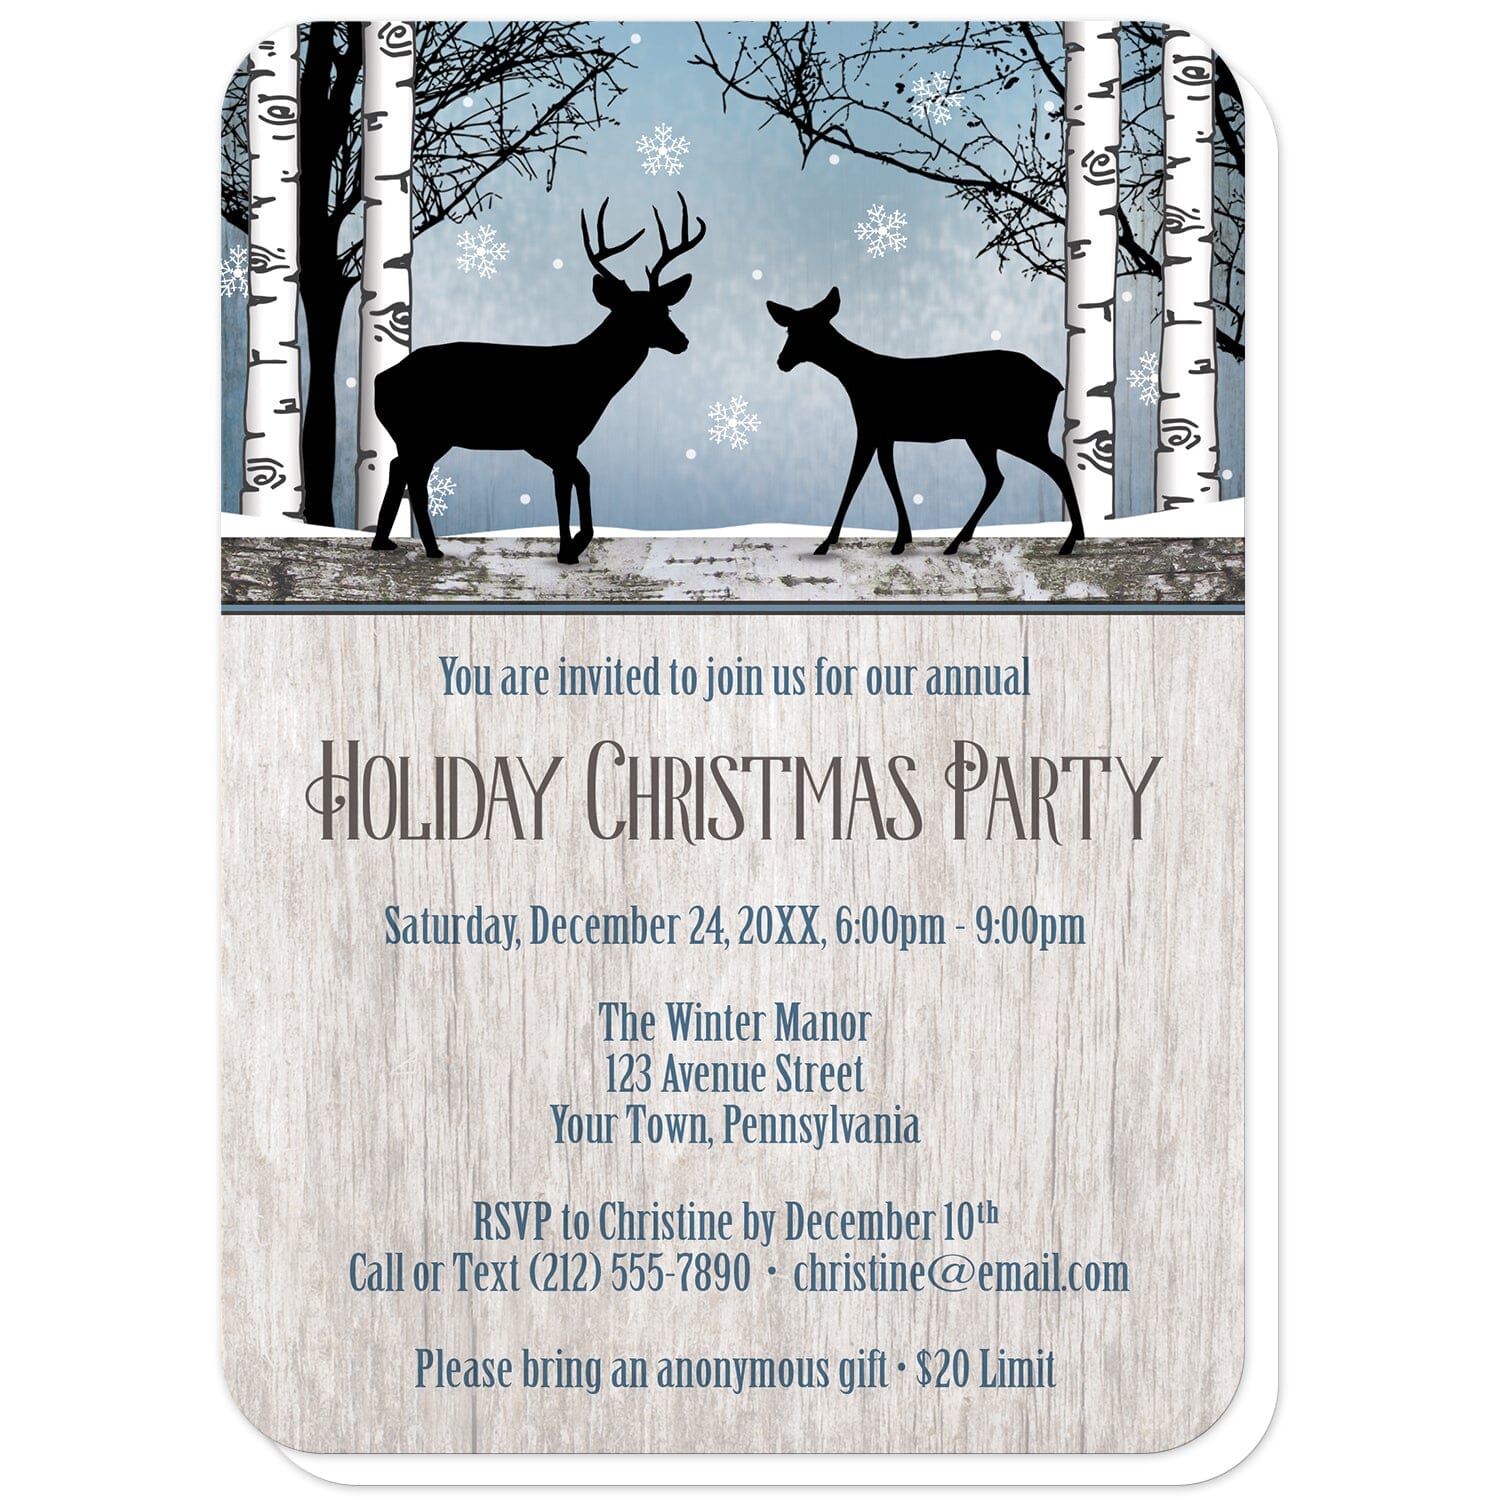 Rustic Blue Winter Deer Christmas Party Invitations (with rounded corners) at Artistically Invited. Rustic blue winter deer Christmas party invitations with two silhouettes of deer surrounded by white birch trees over a snowy blue background with snowflakes. One silhouette is of a buck deer with antlers while the other is a gentle doe, meeting in the middle. Your personalized holiday party details are custom printed in blue and brown over a light country wood background.